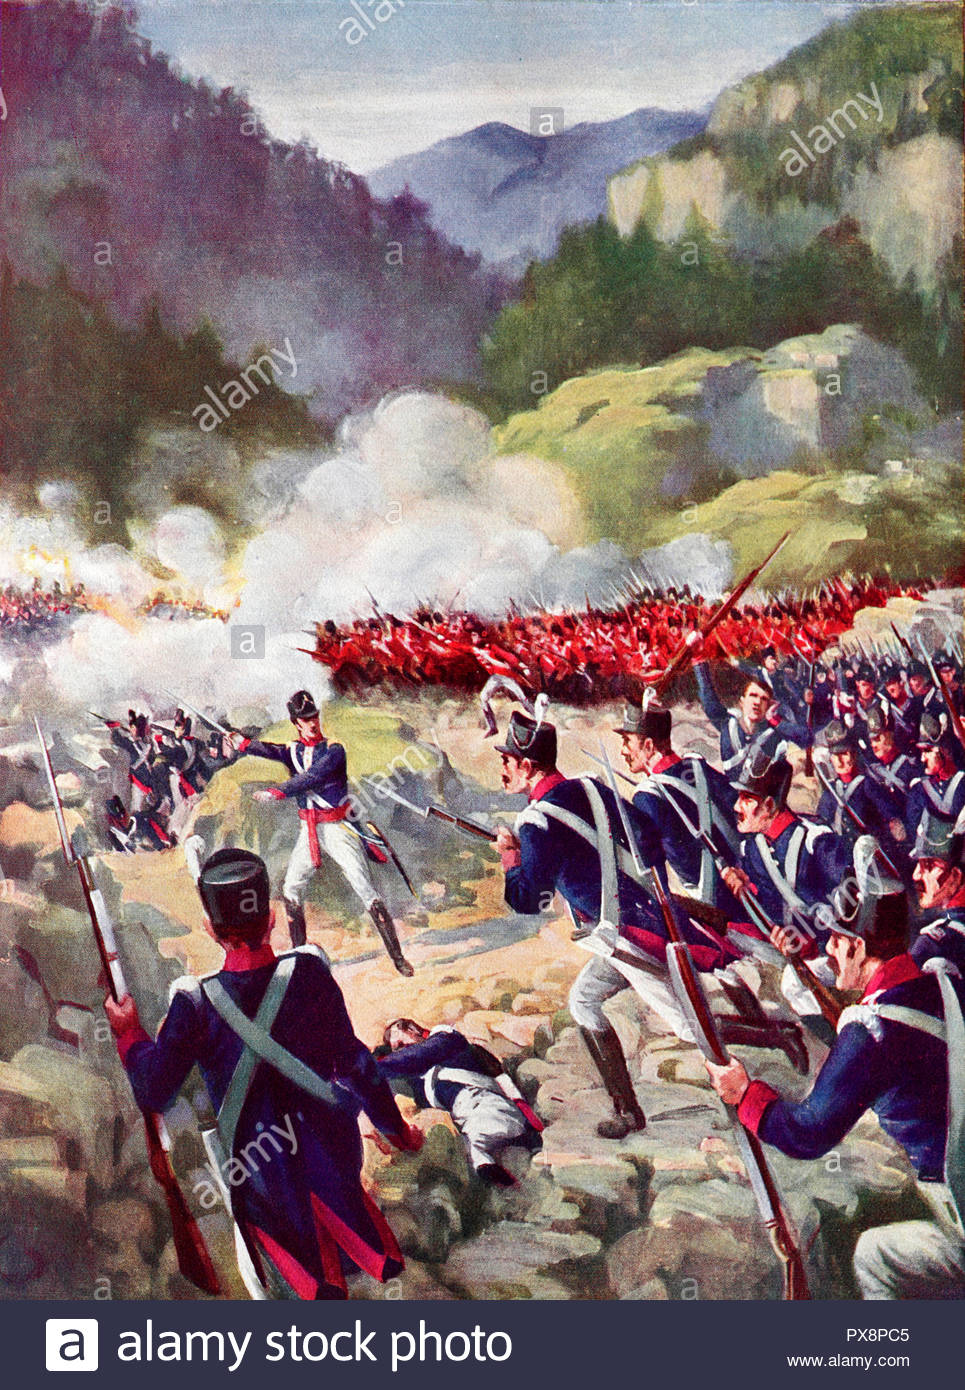 The Battle of Busaco, fought on 27th September 1810 during the Peninsular War in the Portuguese mountain range of Serra do Buçaco, resulted in the defeat of French forces by Lord Wellington's Anglo-Portuguese Army, colour illustration from 1922 Stock Photo